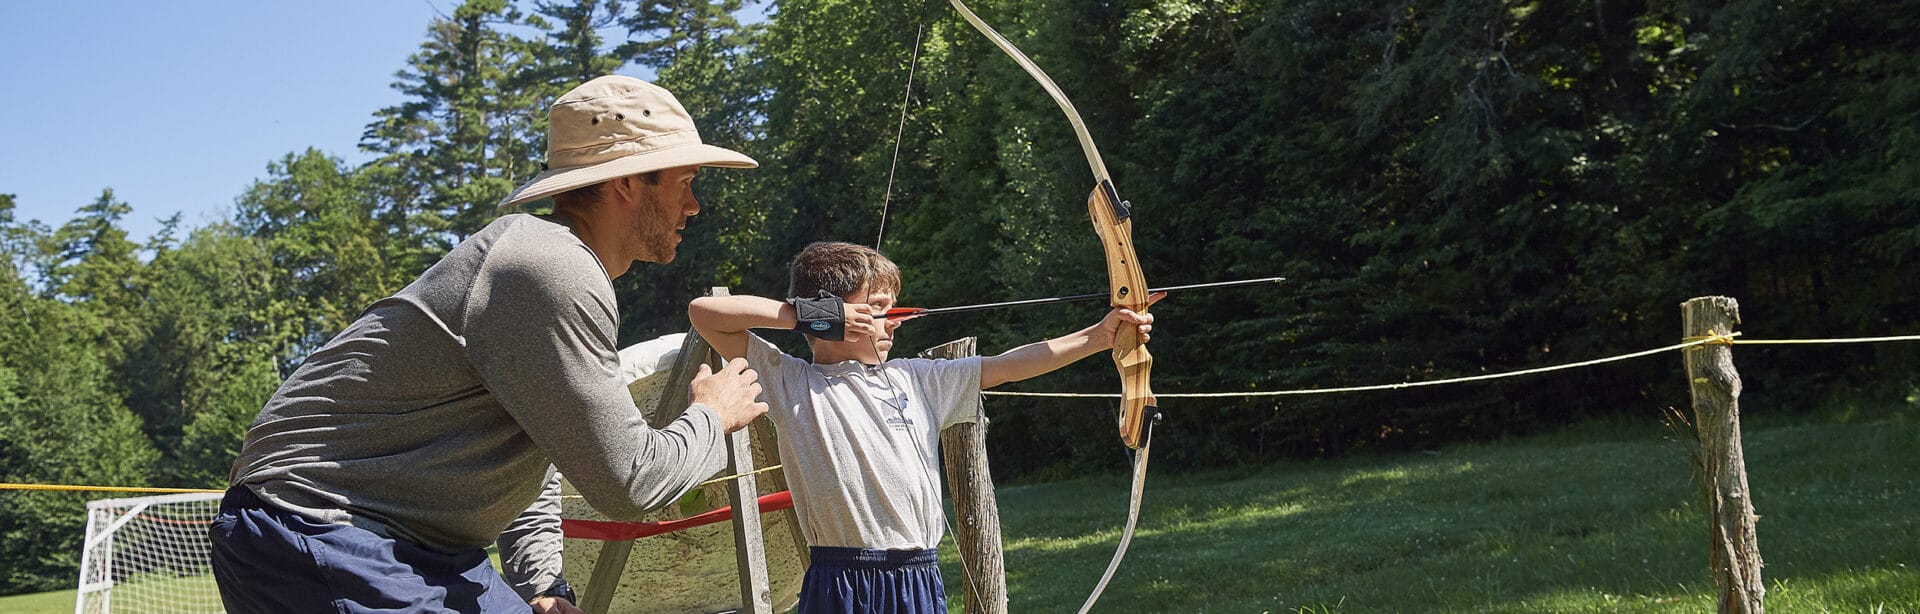 Archery is just one activity at Camp Mowglis Boys Camp in New Hampshire